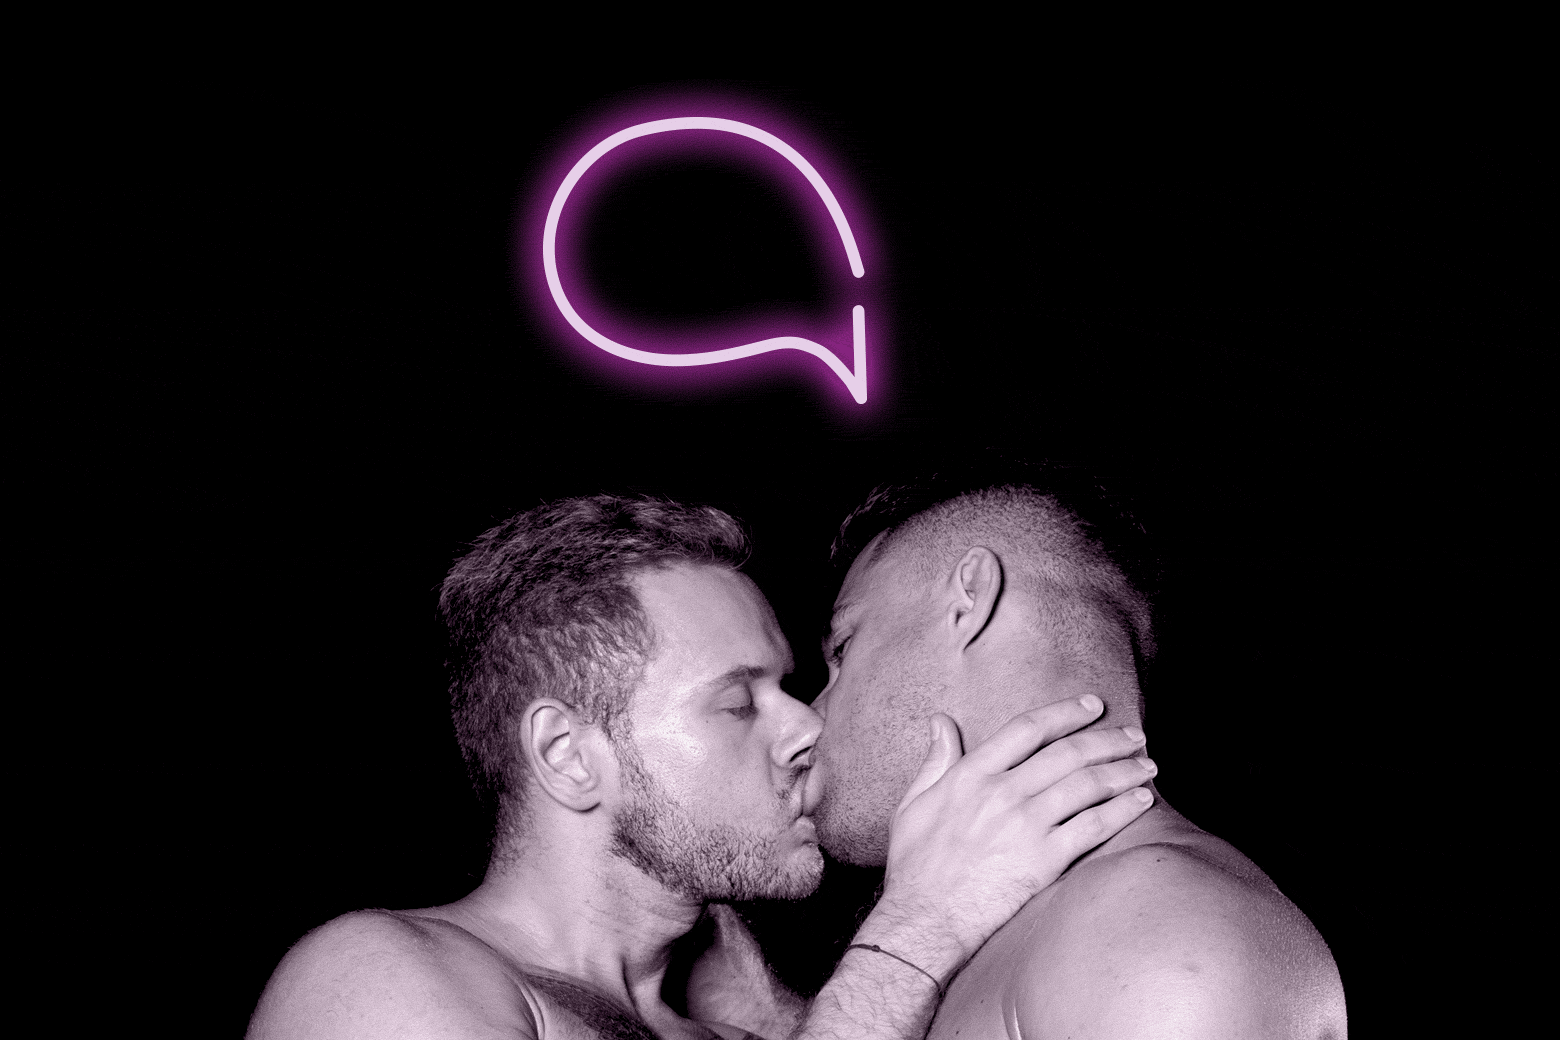 Two men kiss with a speech bubble for "safe word" above their heads.